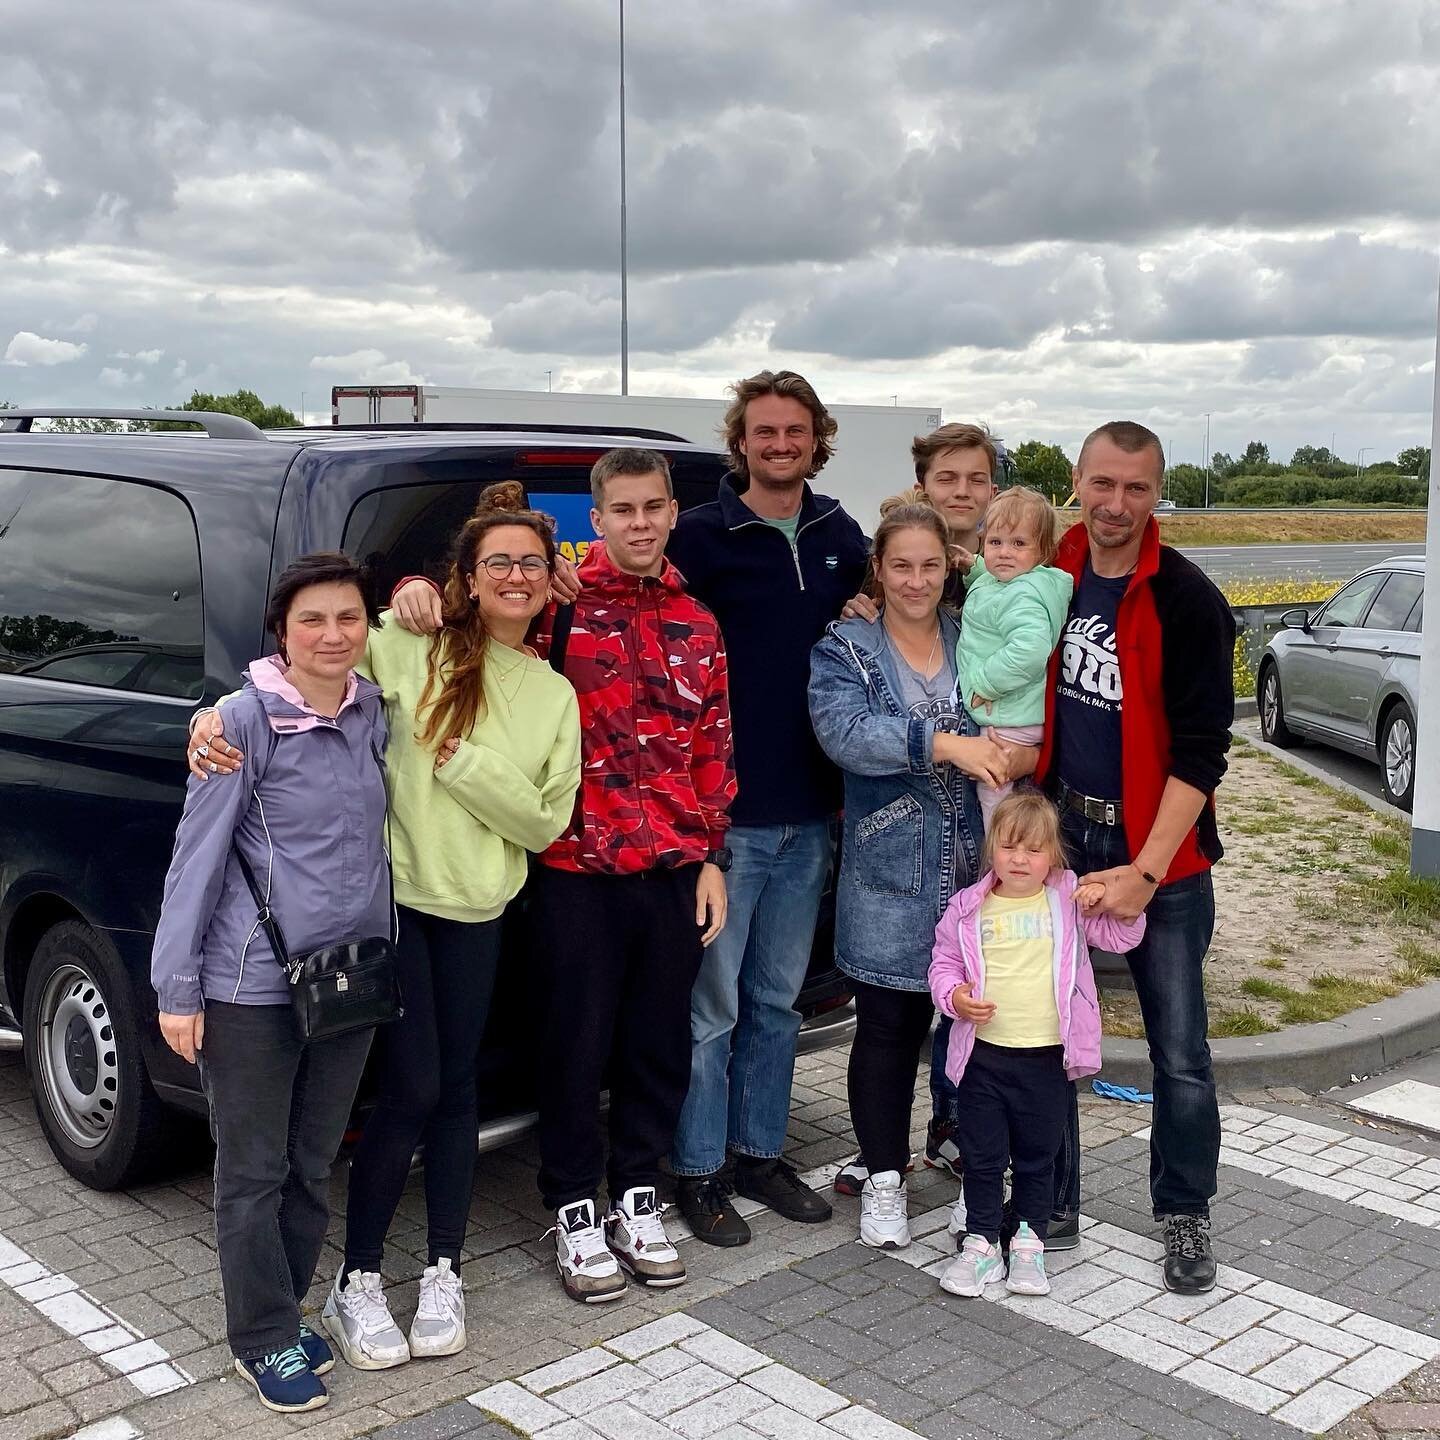 Happy that everyone made it on the bus and arrived at their new addresses in Holland. 

Inna, Artyom and their sweet kids (escaped from Donbas region) got a warm welcome from the church community in Roelofarendsveen where they will stay. Alla got bac